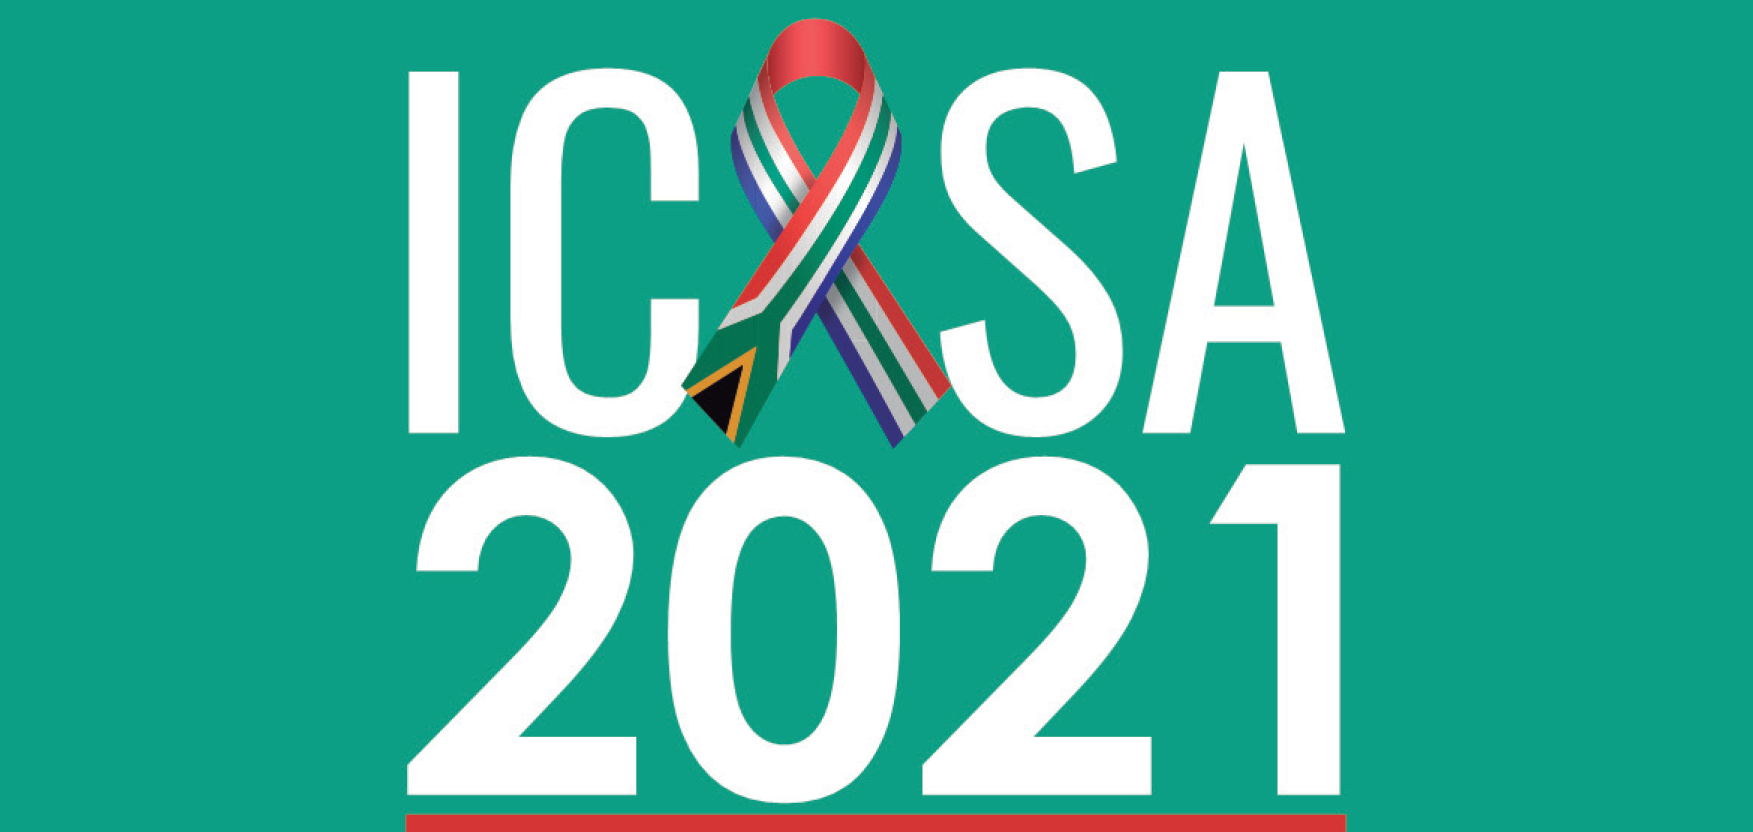 ICASA 2021 REPORT- SOUTH AFRICA